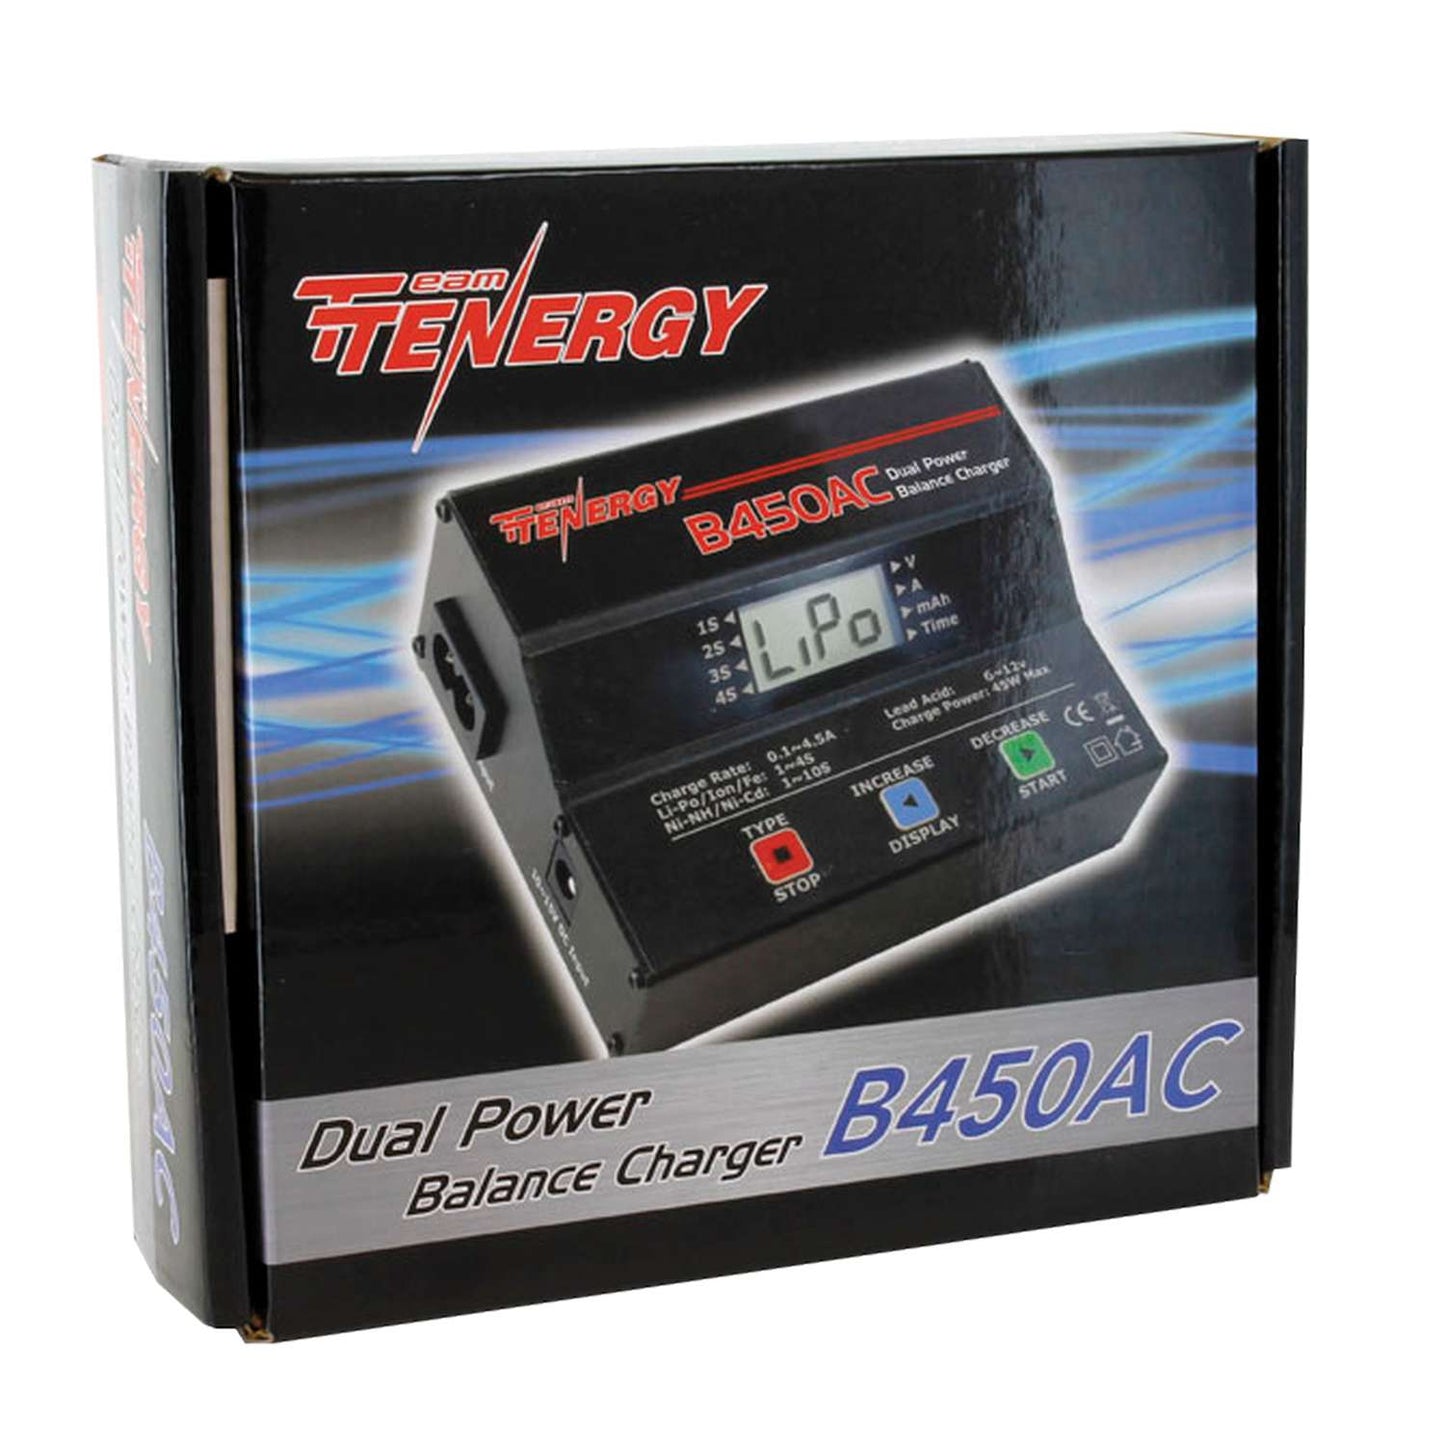 Tenergy B450AC 45W AC/DC Compact Charger